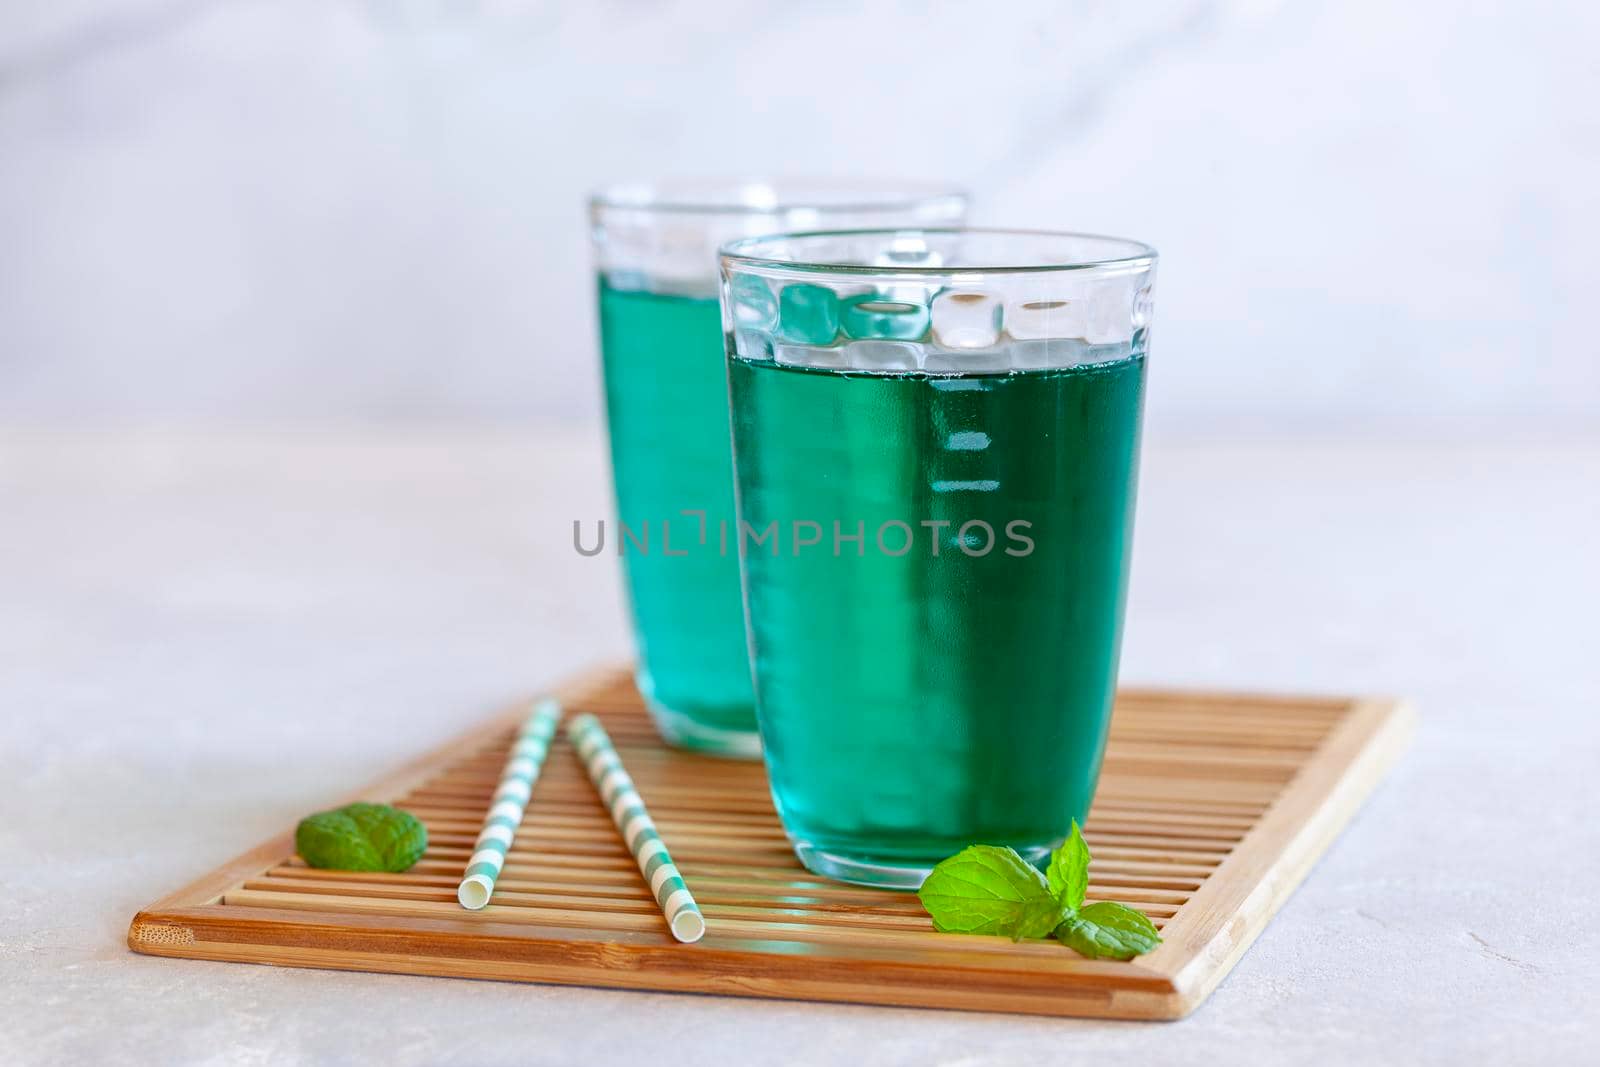 Diabolo menthe, french popular non-alcoholic cold drink, portion of two